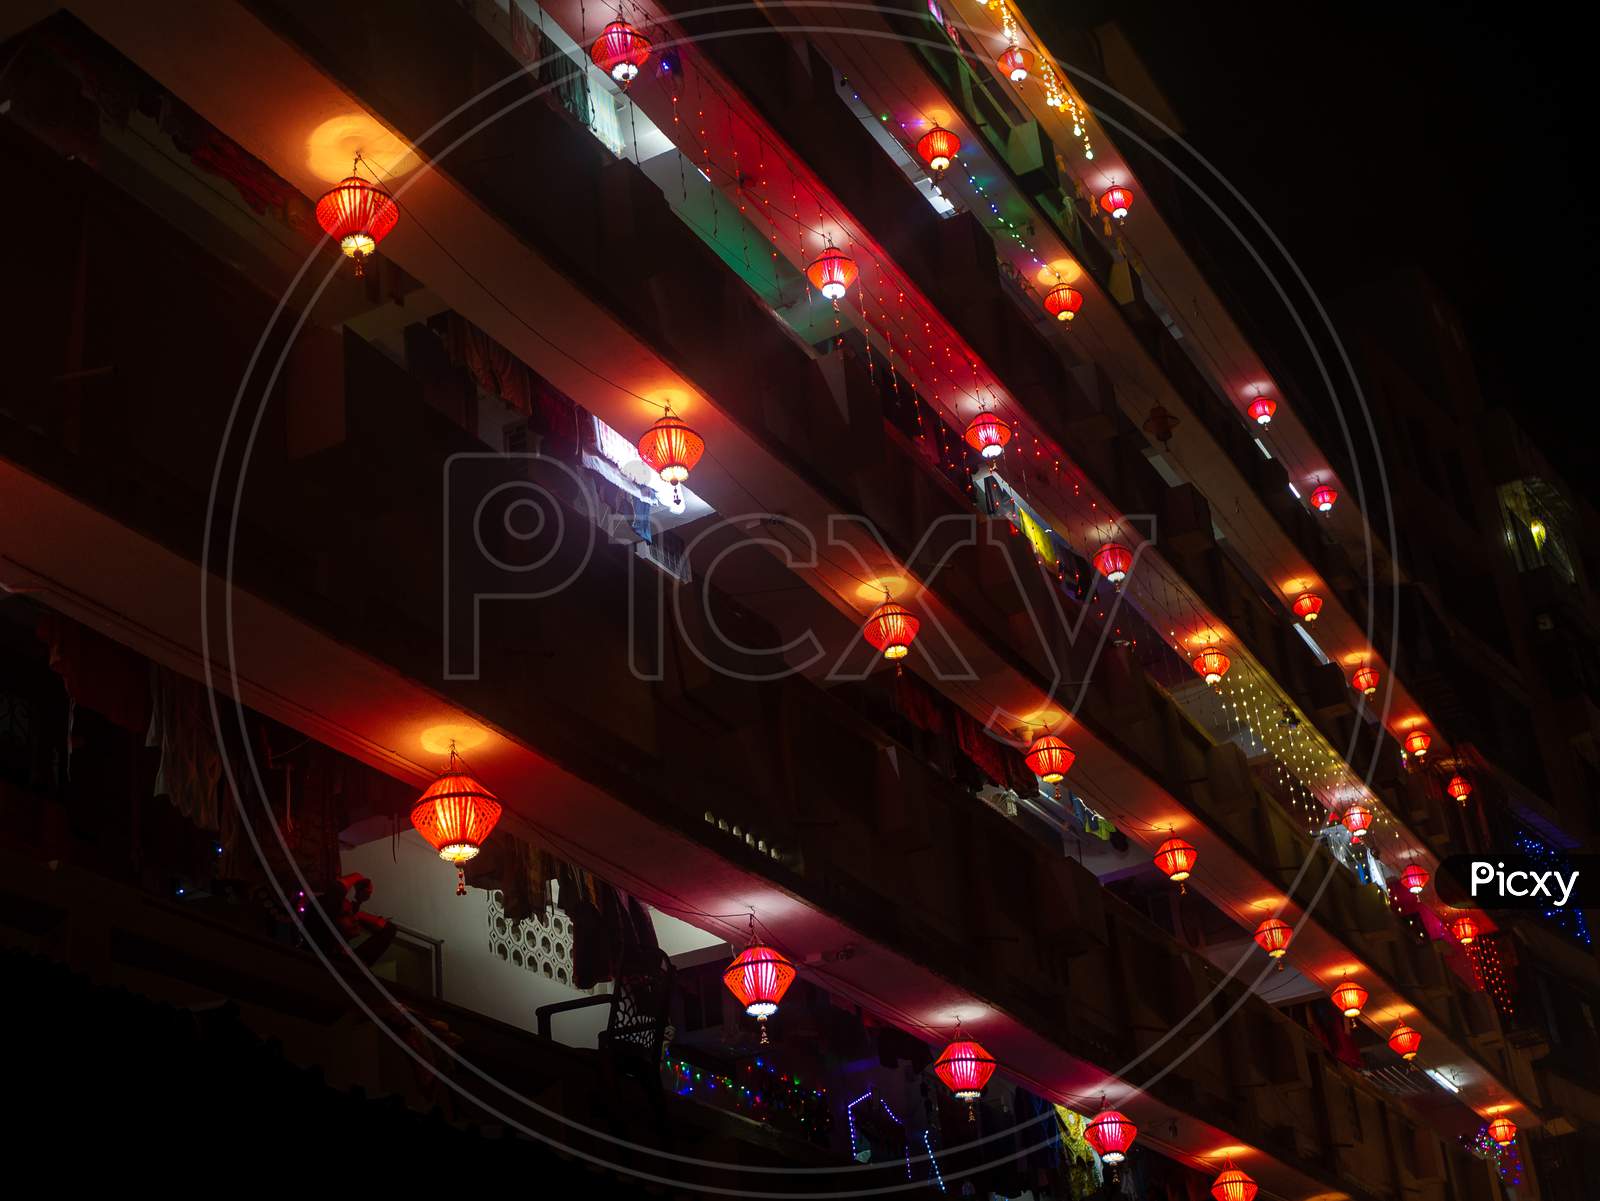 Colorful Akash Kandil / Lantern Lights Hanging Outside Houses On The Occassion Of Diwali